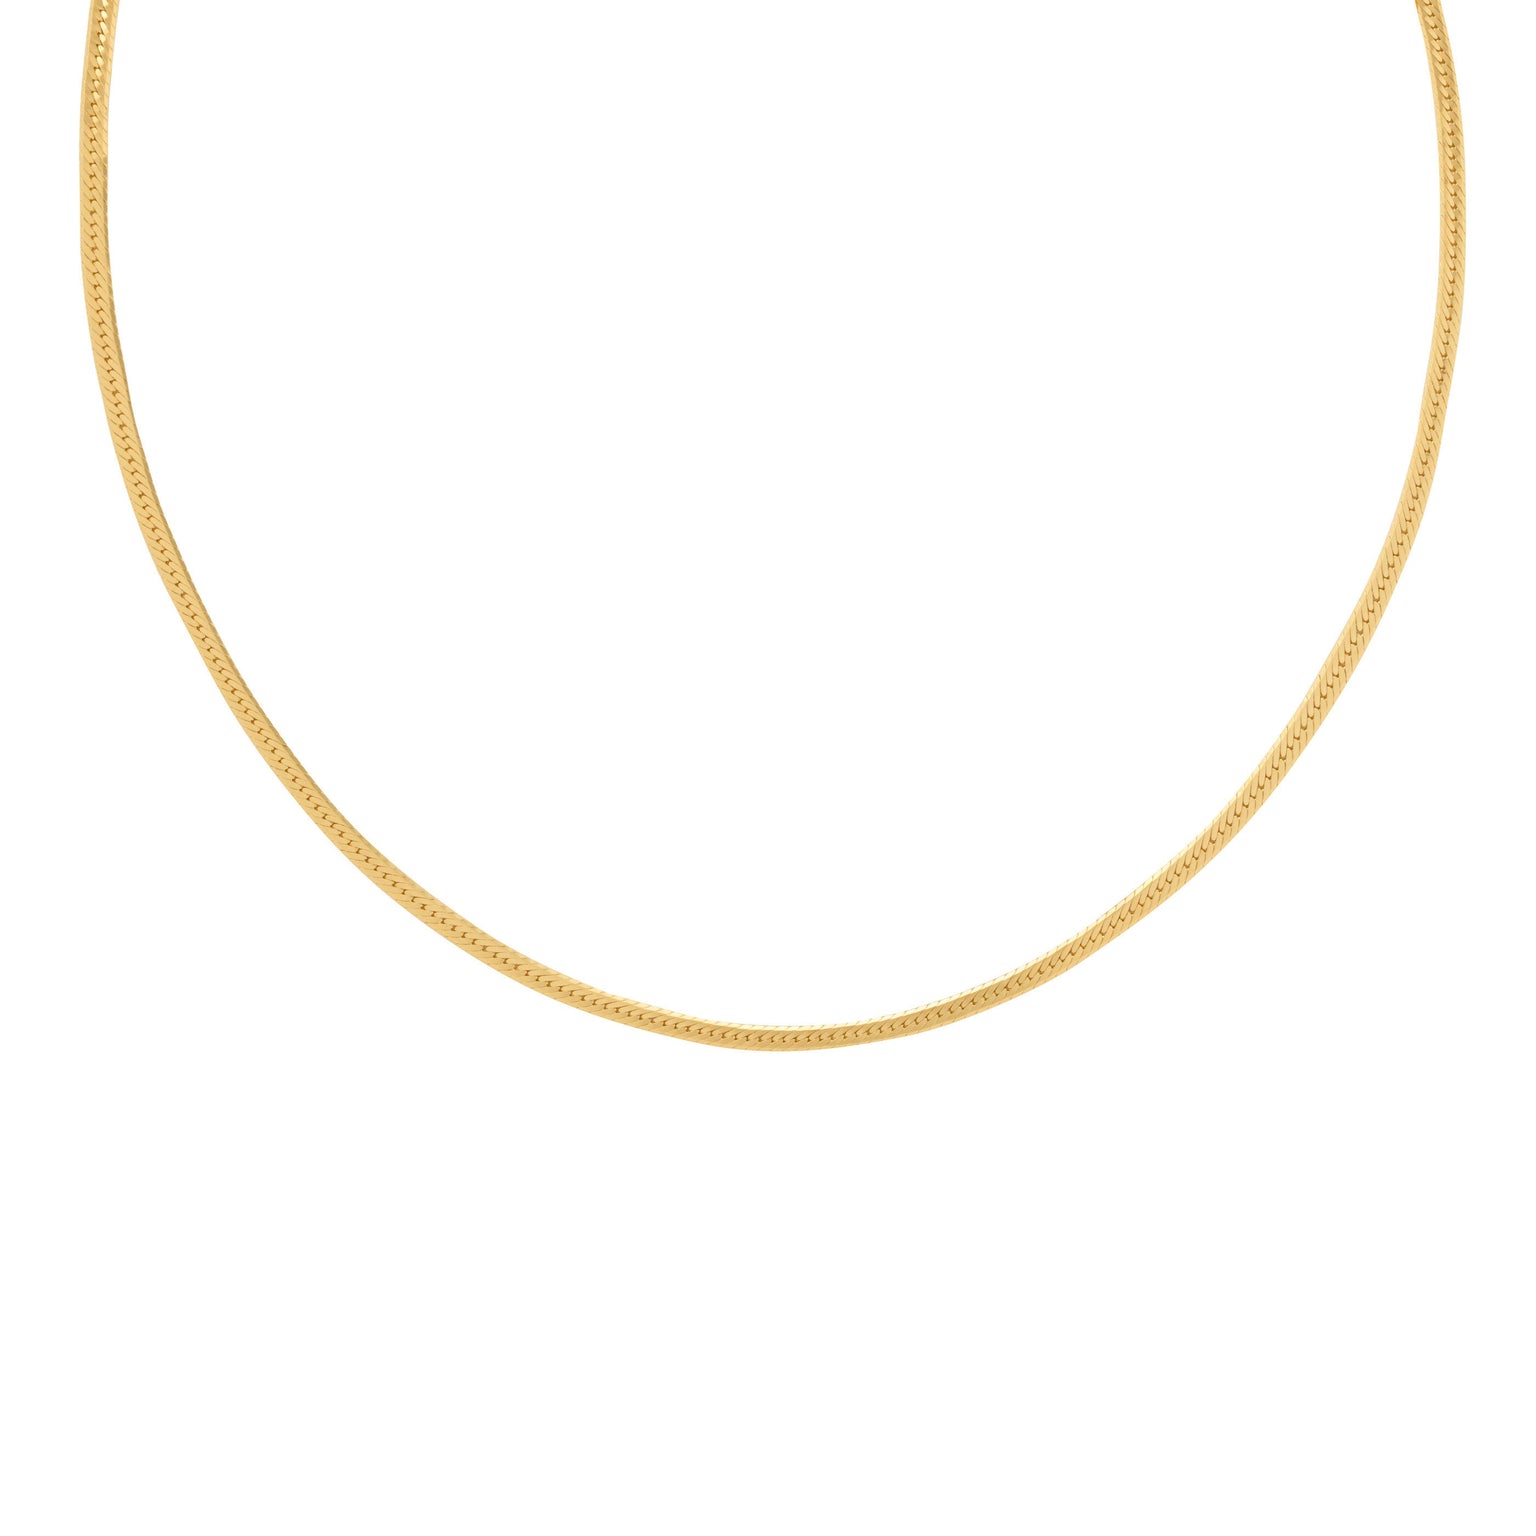 Simple gold snake chain necklace